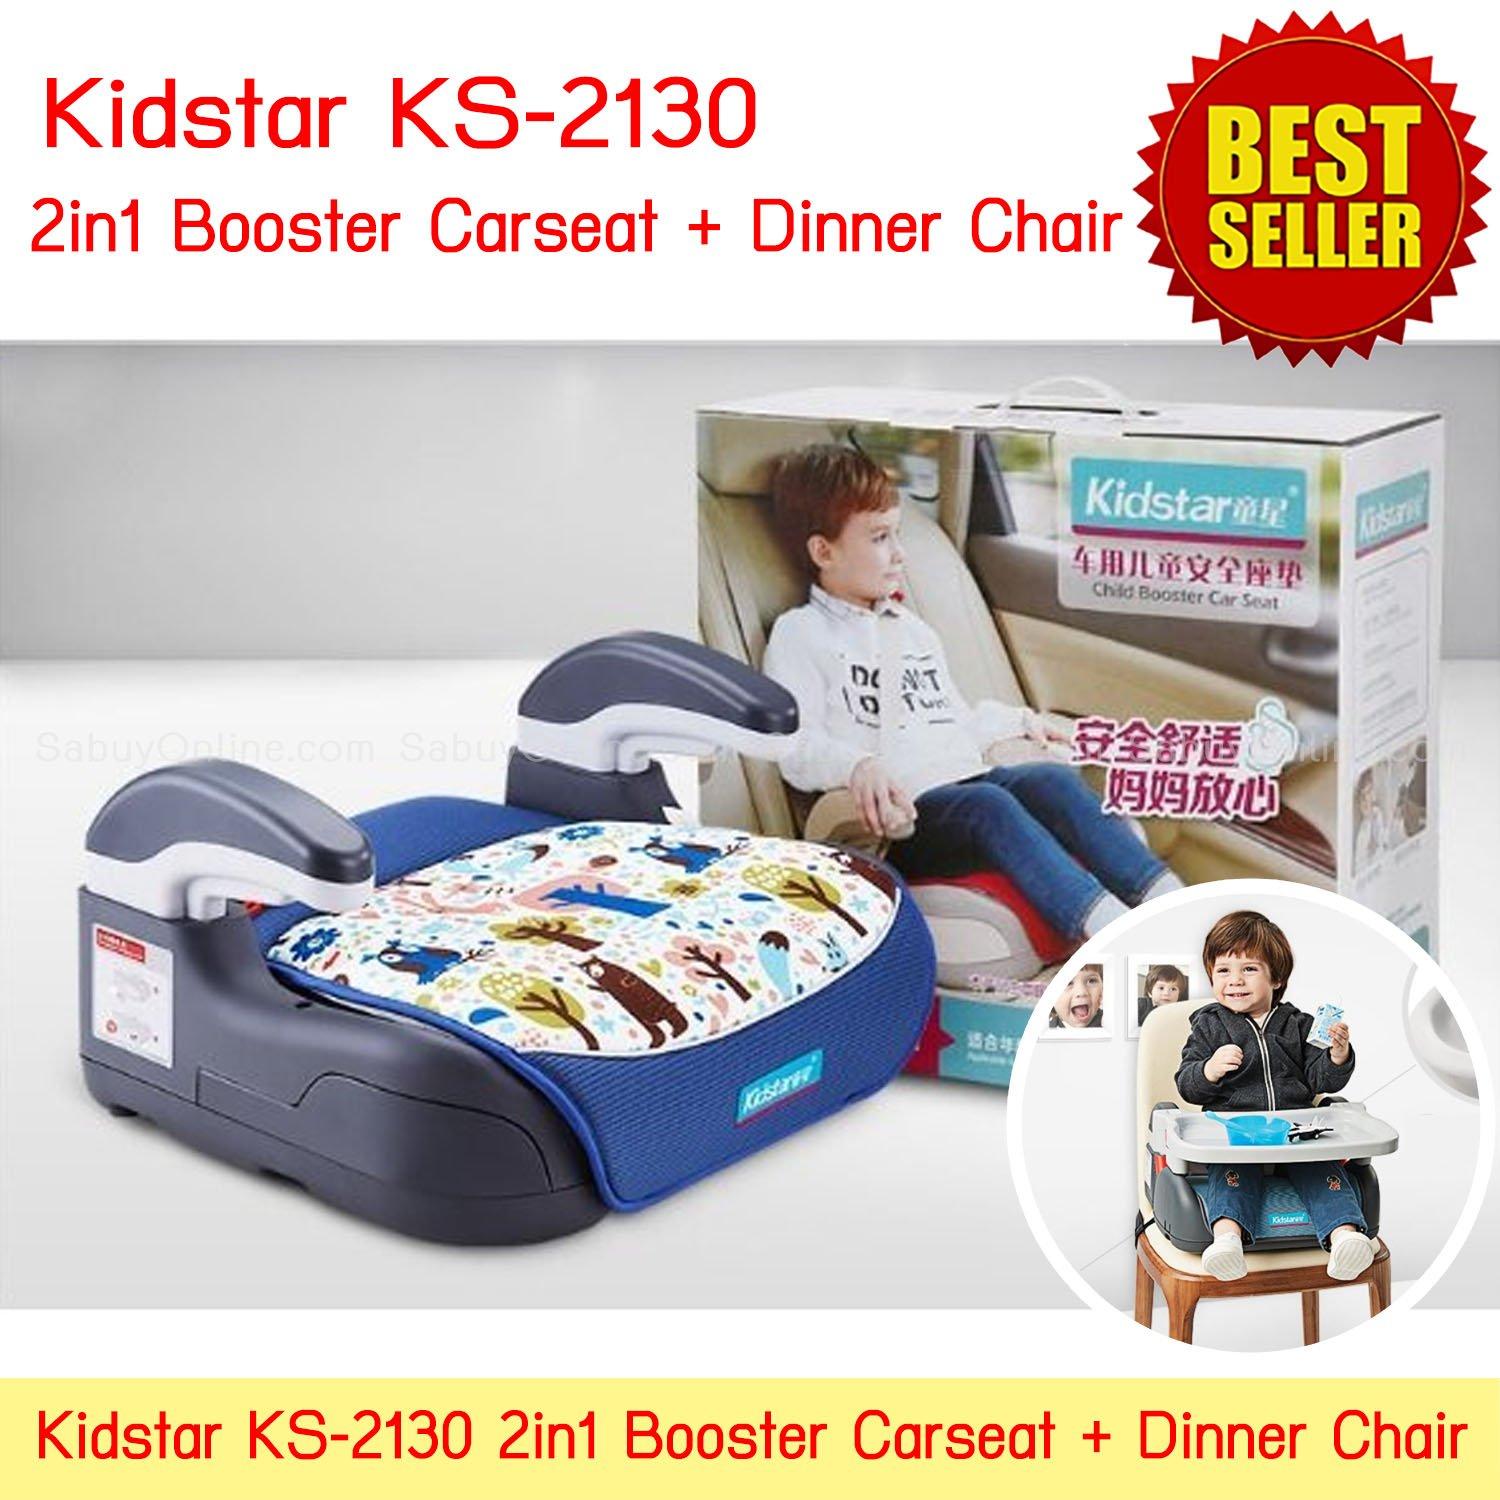 Kidstar 2 in 1 Booster Carseat + Dinner Chair